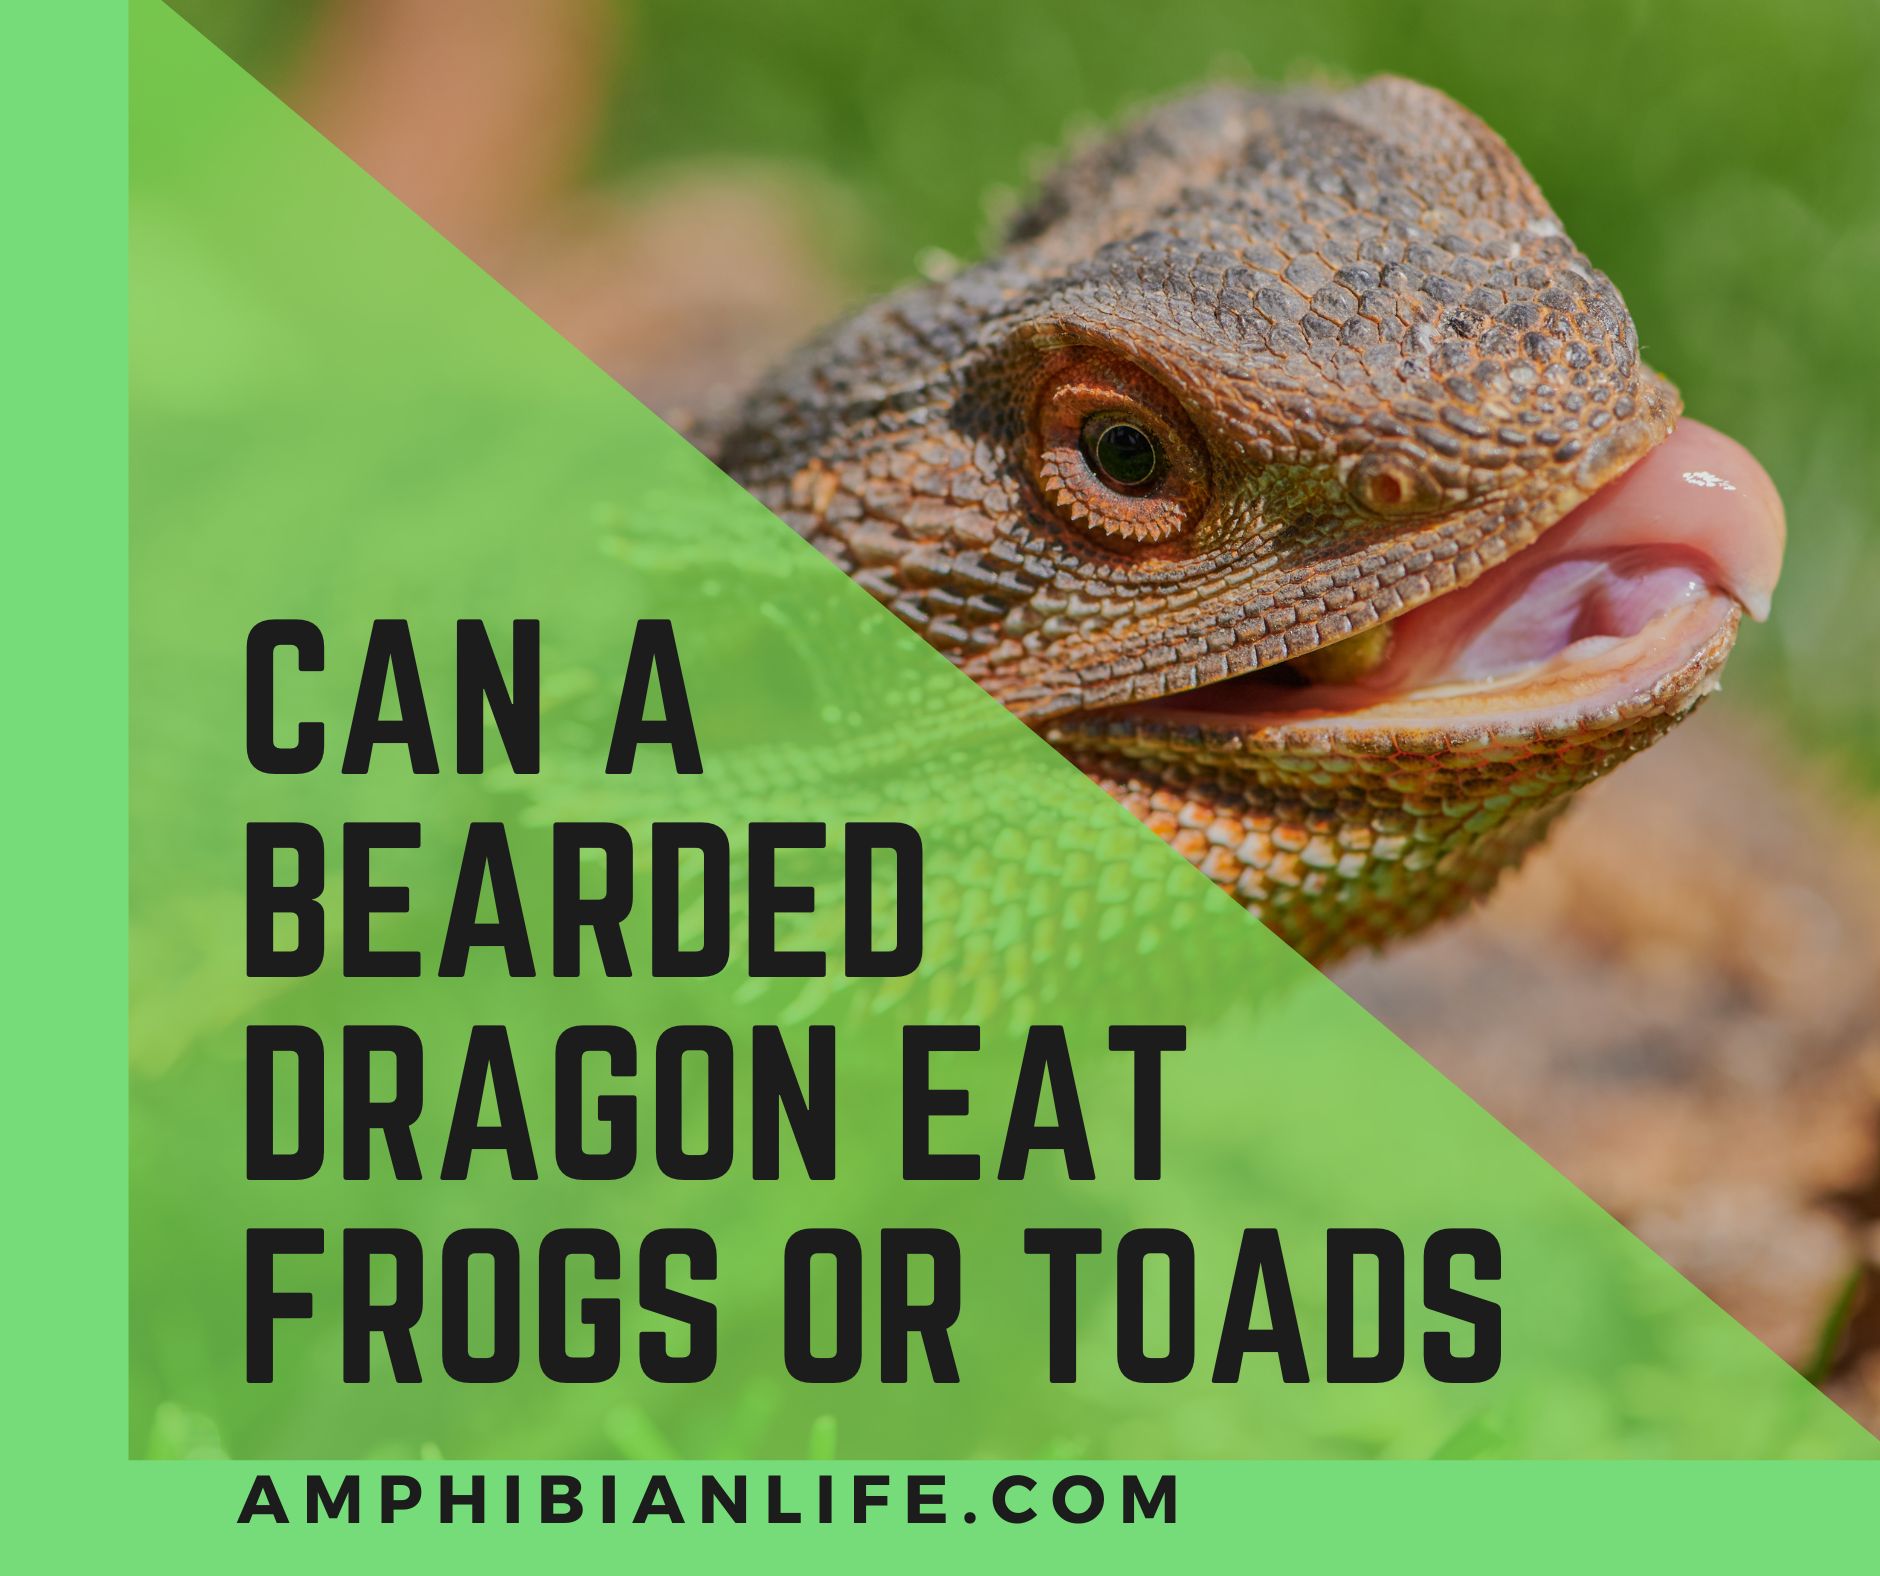 Can bearded dragons eat frogs or toads?